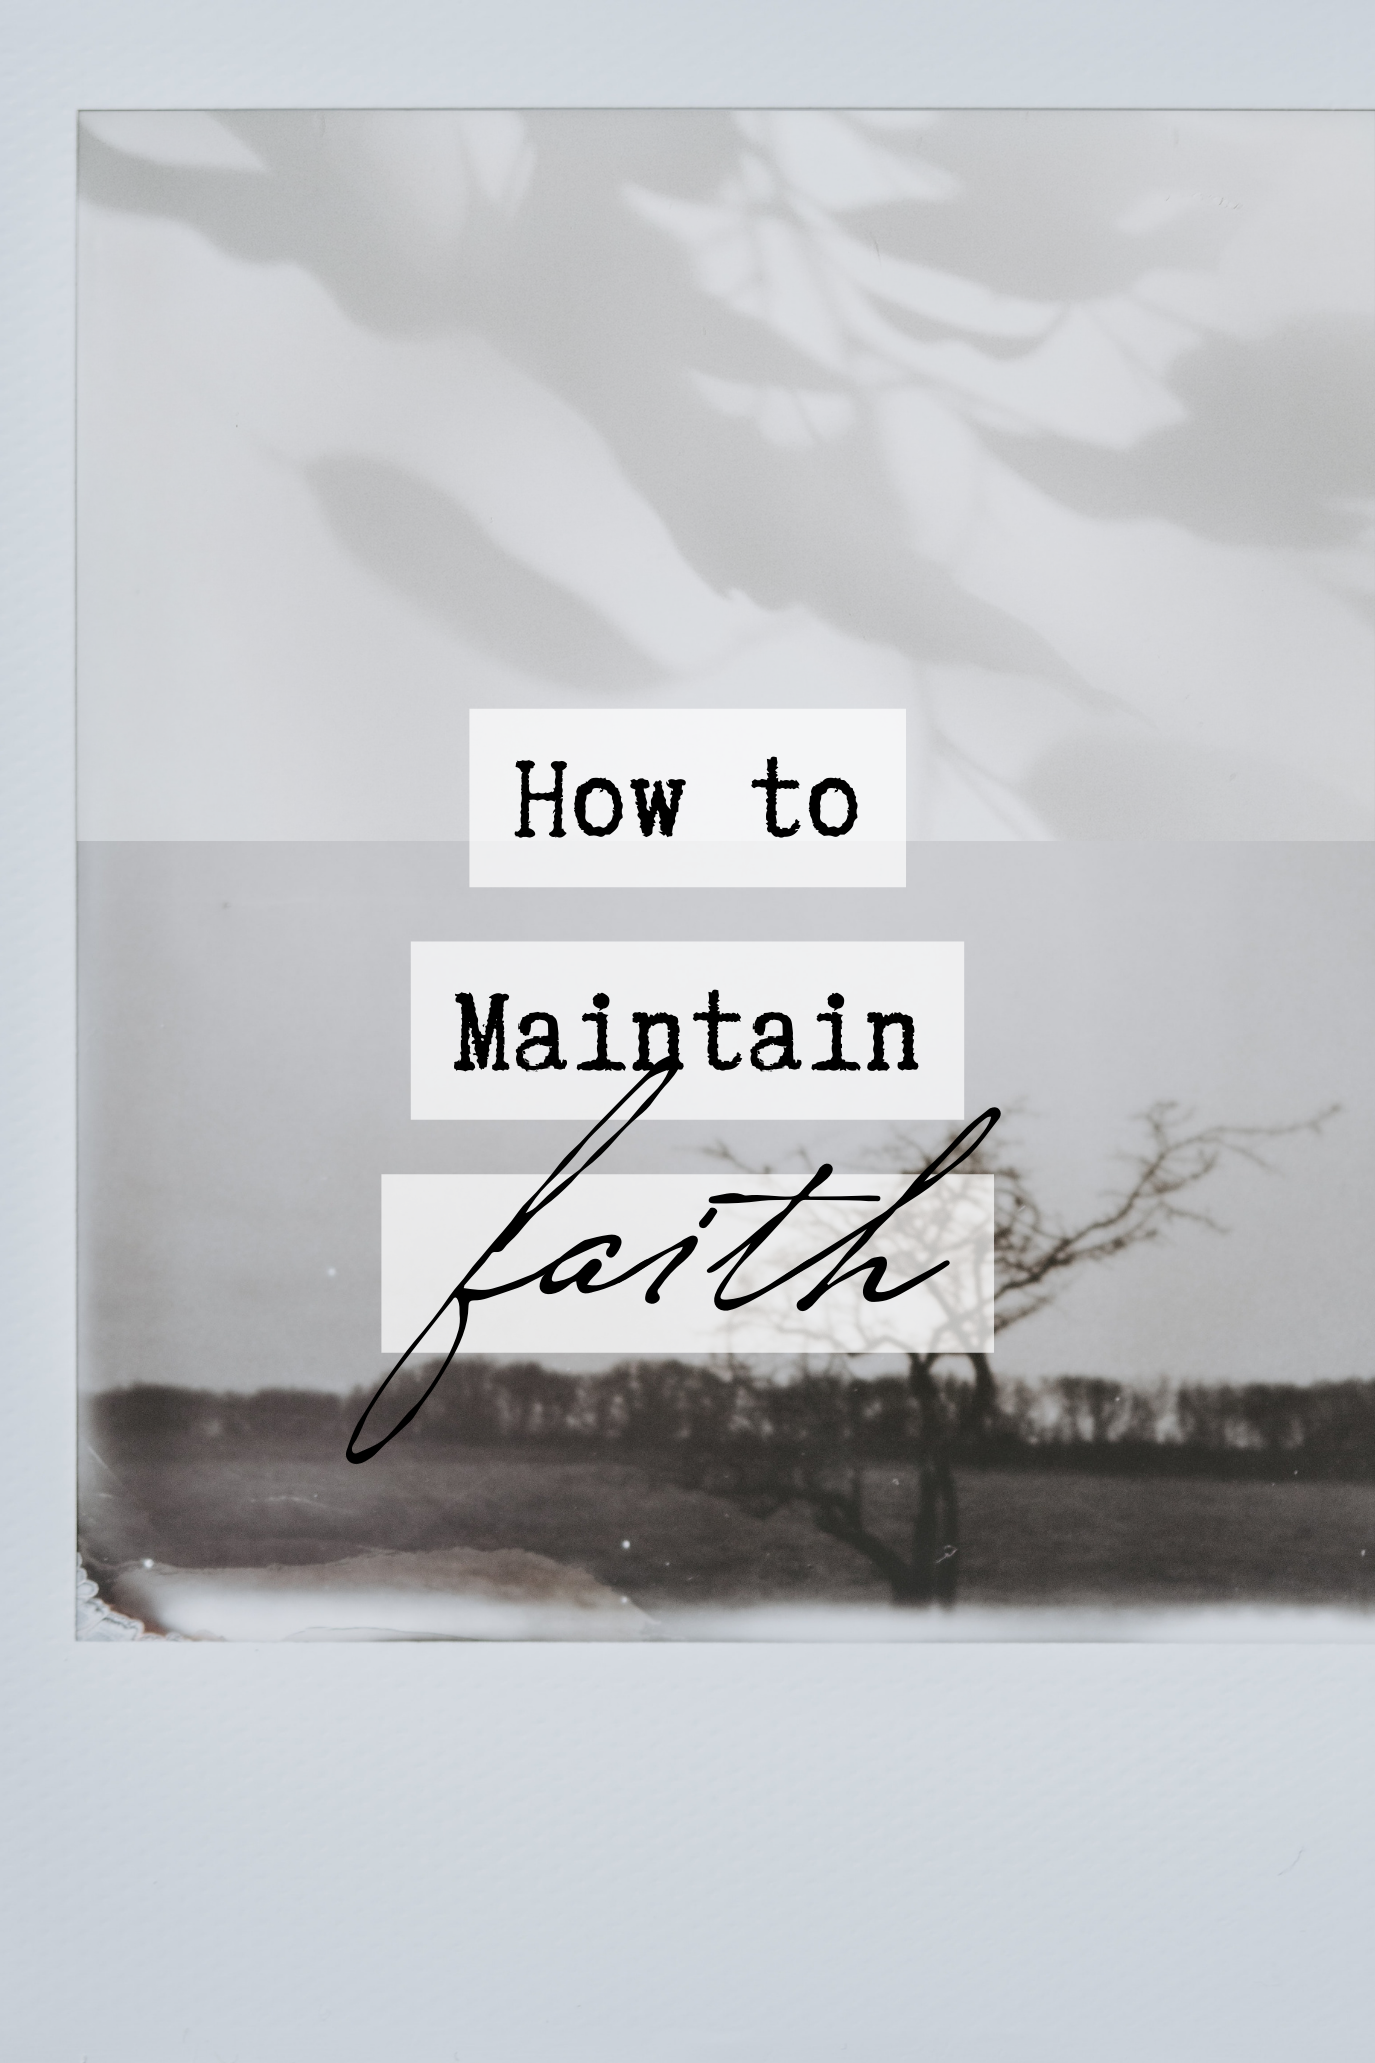 The Self-Help Psychic Podcast with Tabitha Stitt Episode How to Maintain Faith